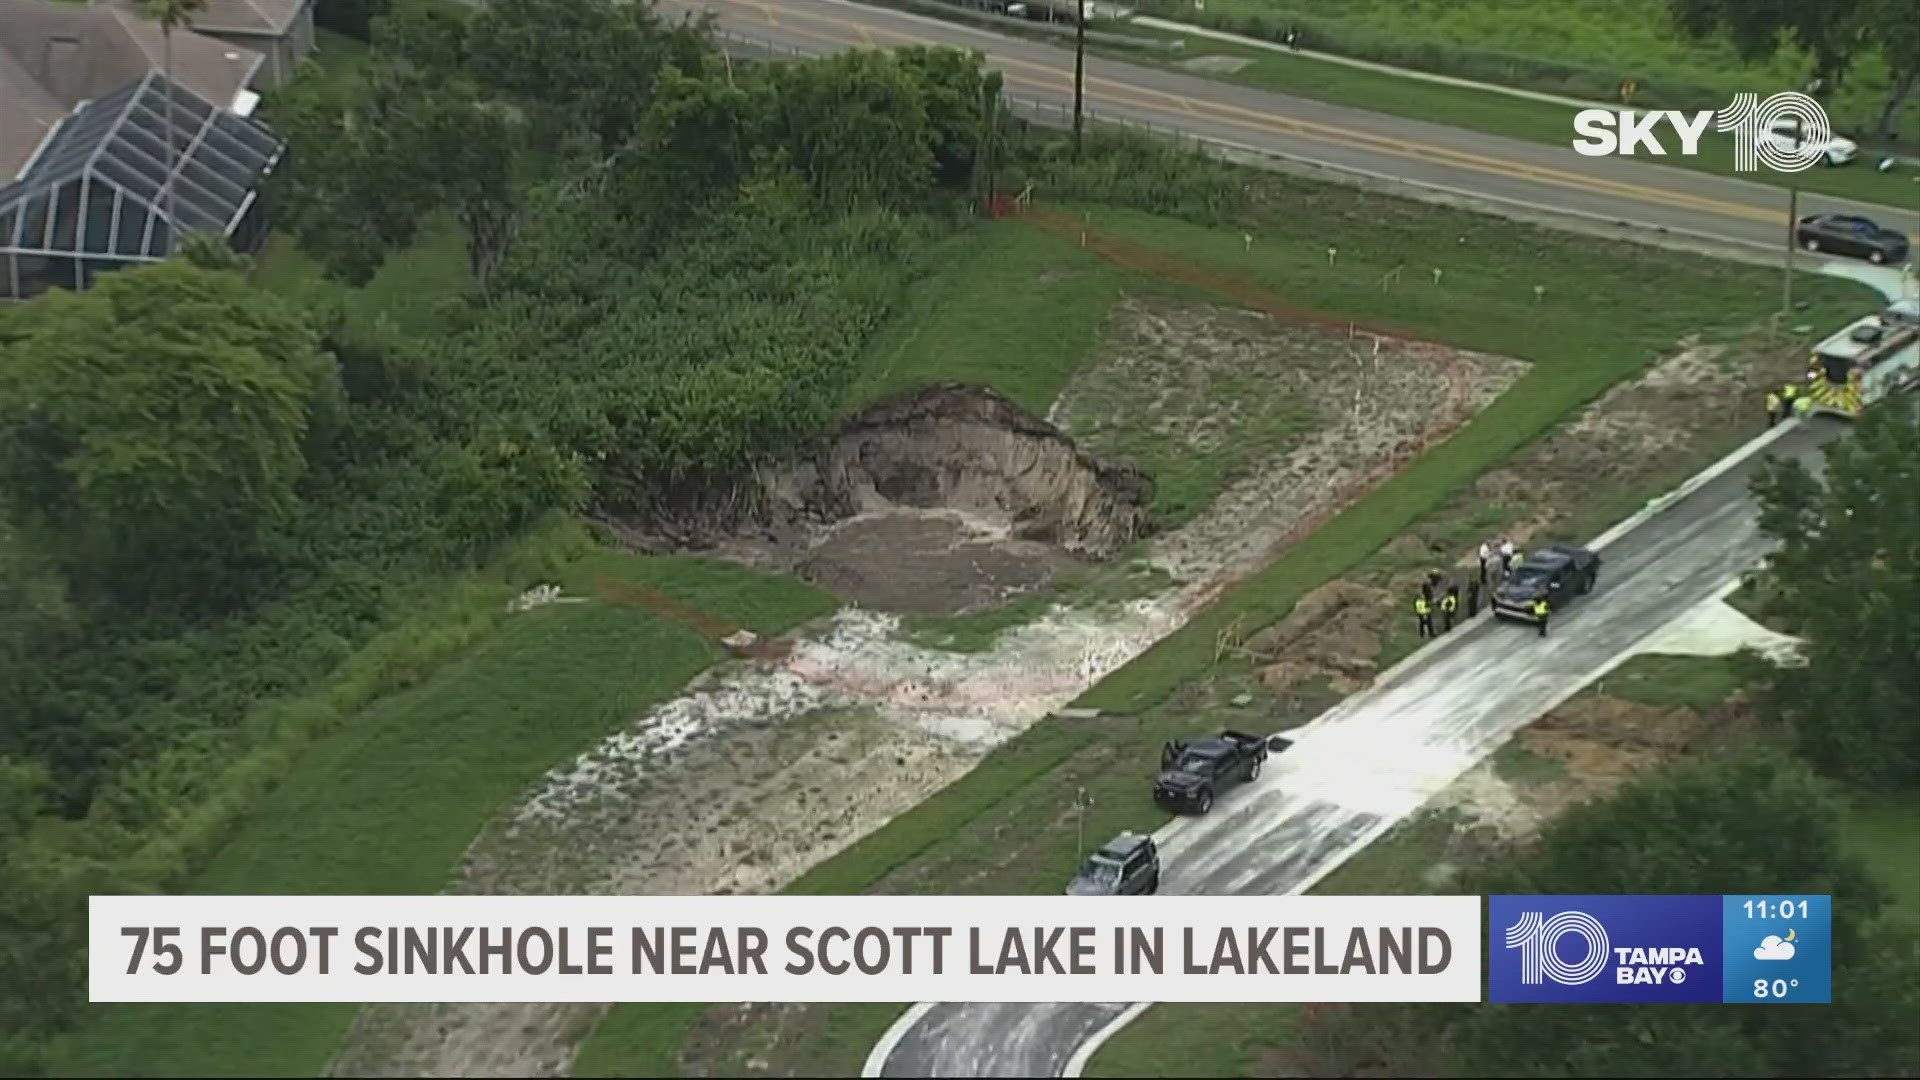 "The sinkhole is growing, we don't know how much bigger it will grow," Sheriff Grady Judd said.